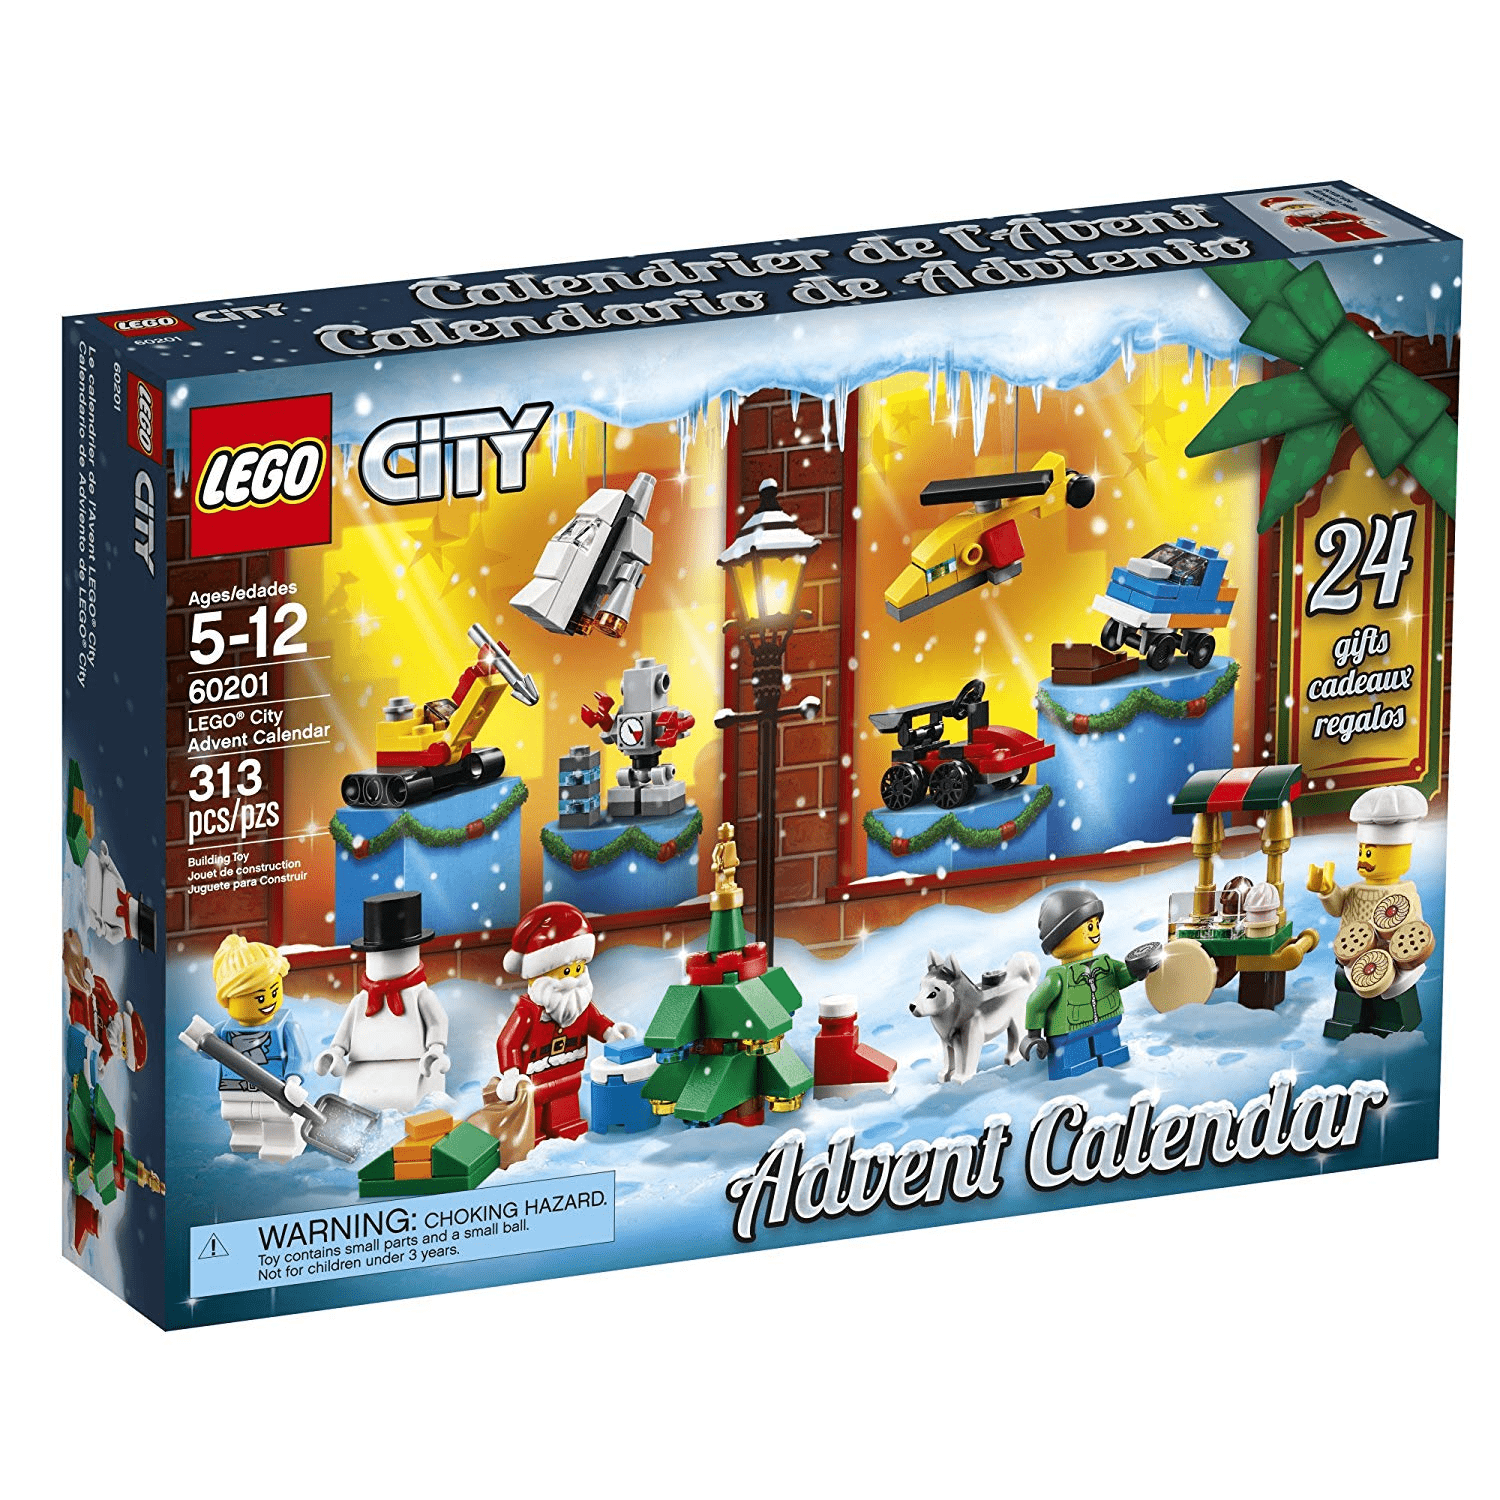 hjemmelevering skammel En smule Lego 2018 Advent Calendars Available Now! Star Wars, Friends, City Town! -  Hello Subscription